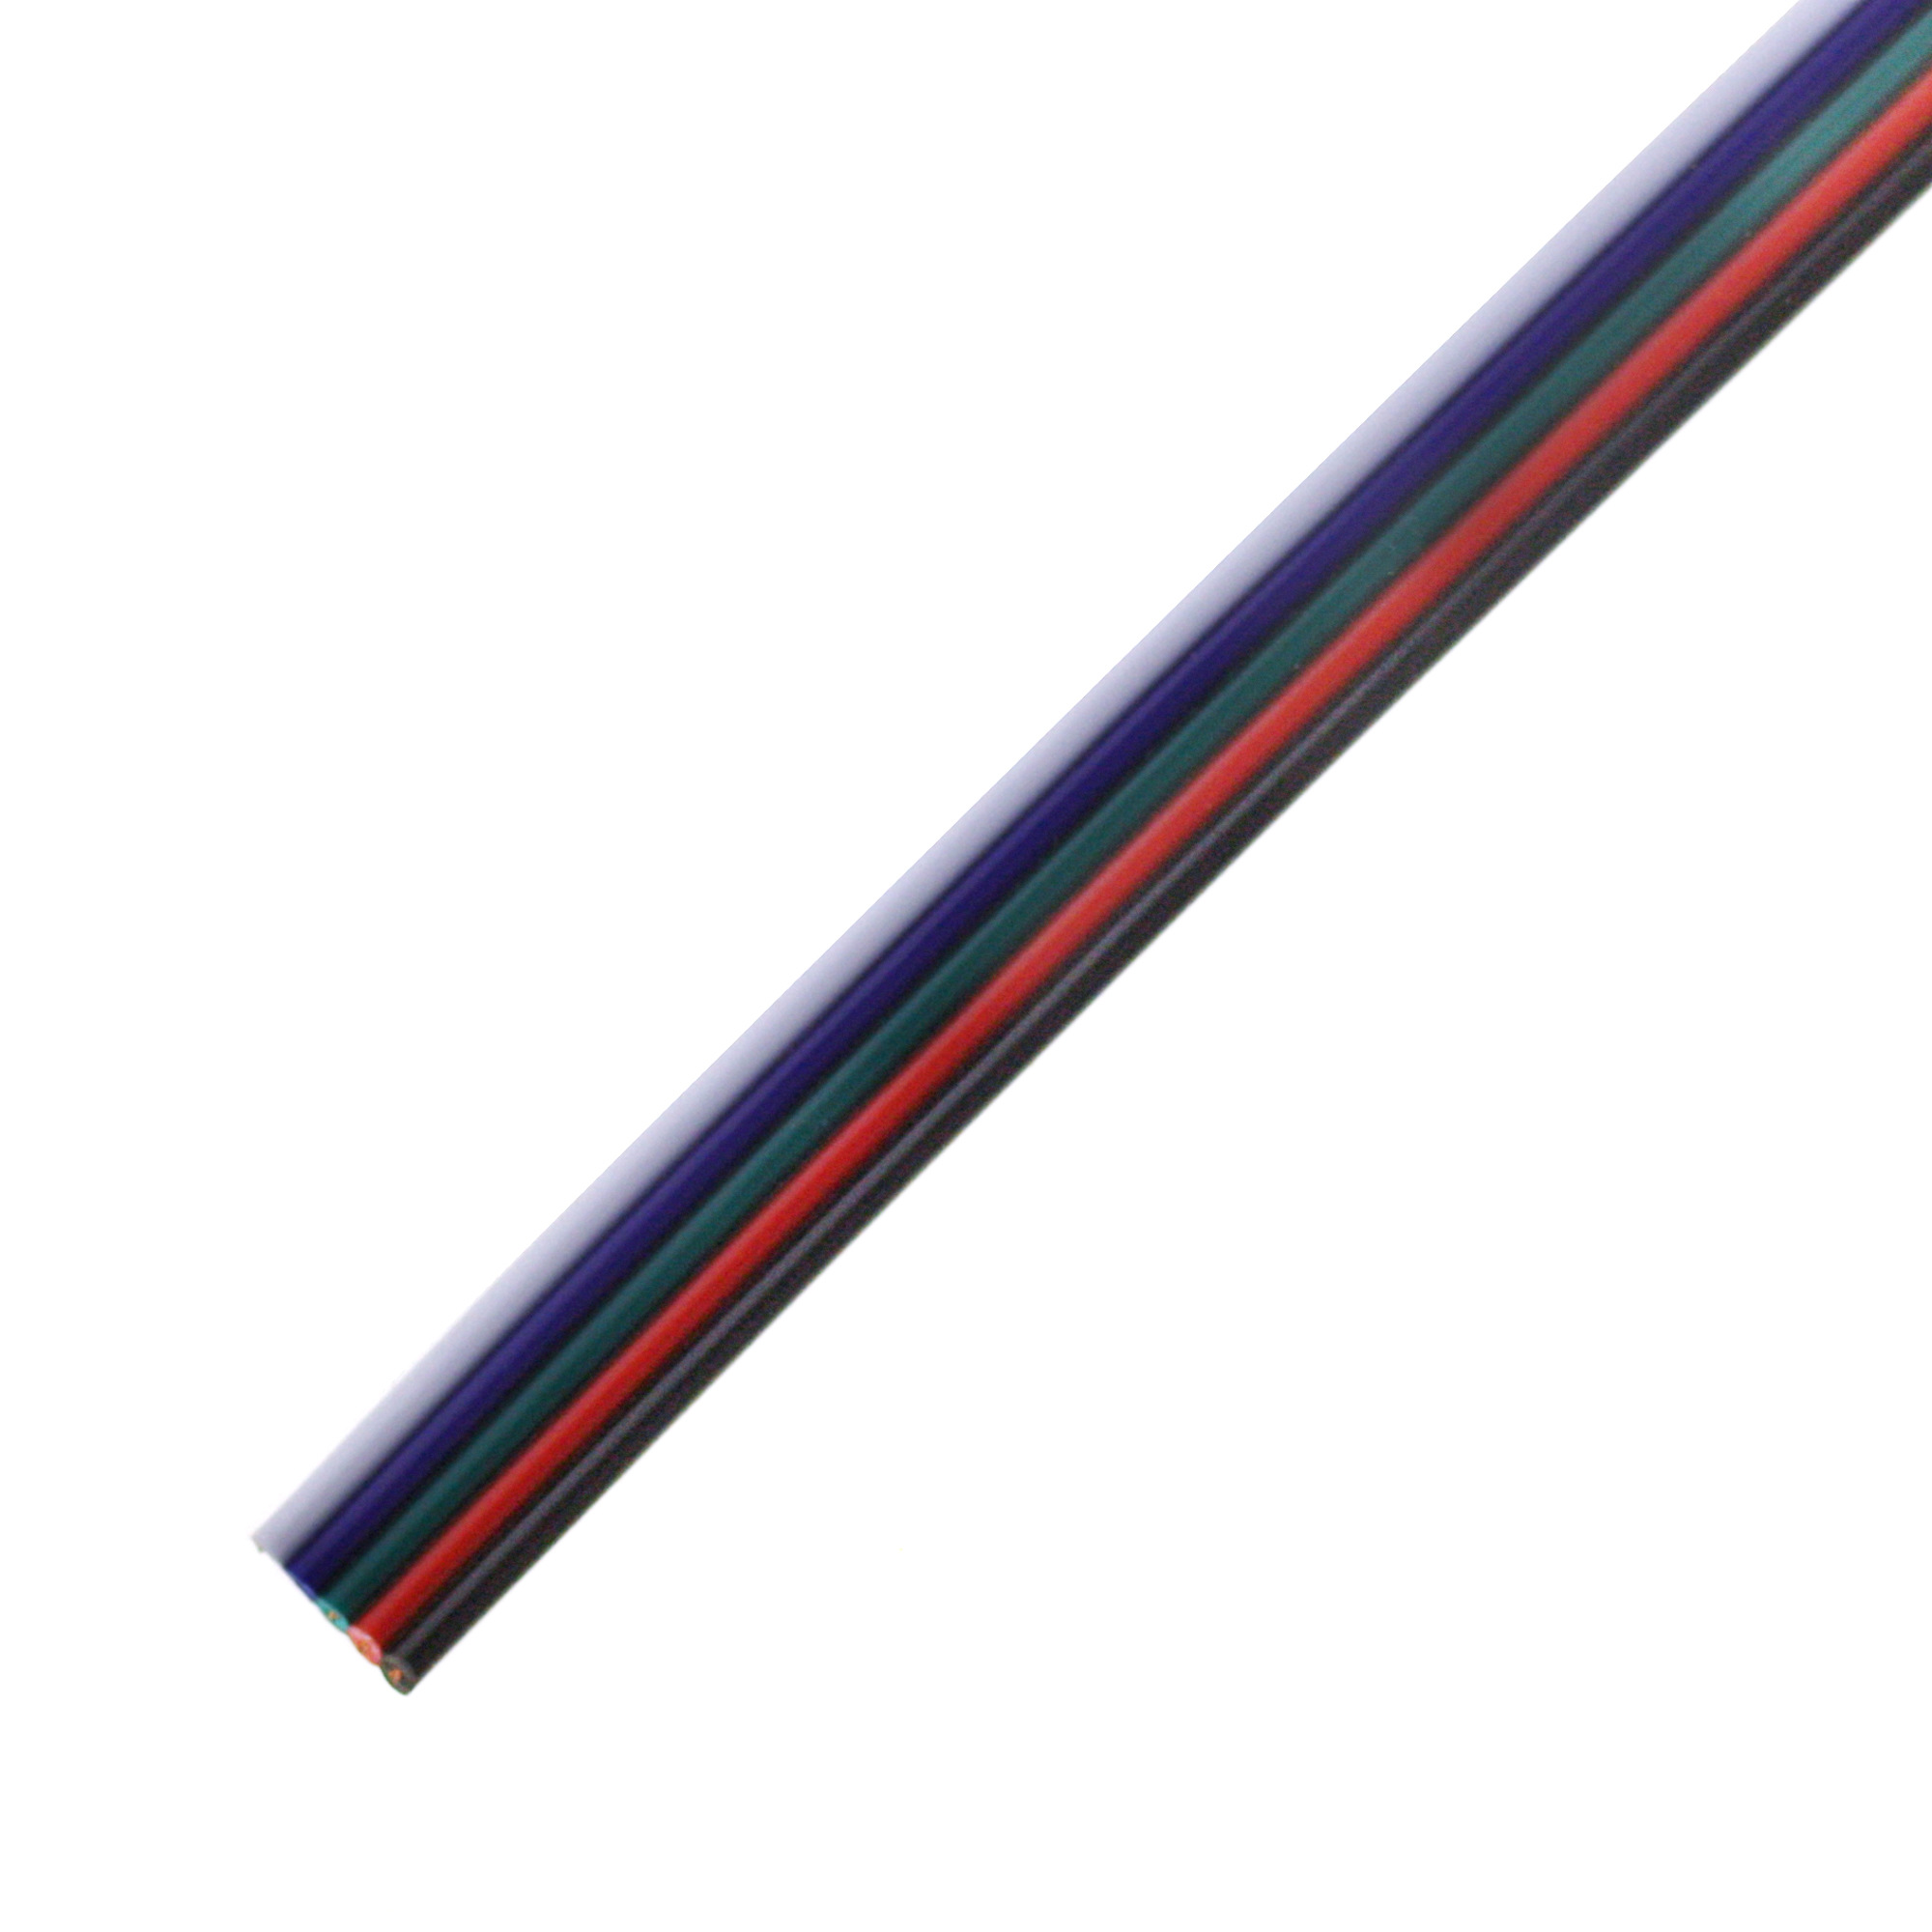 RGBW connection wire - 10 meter